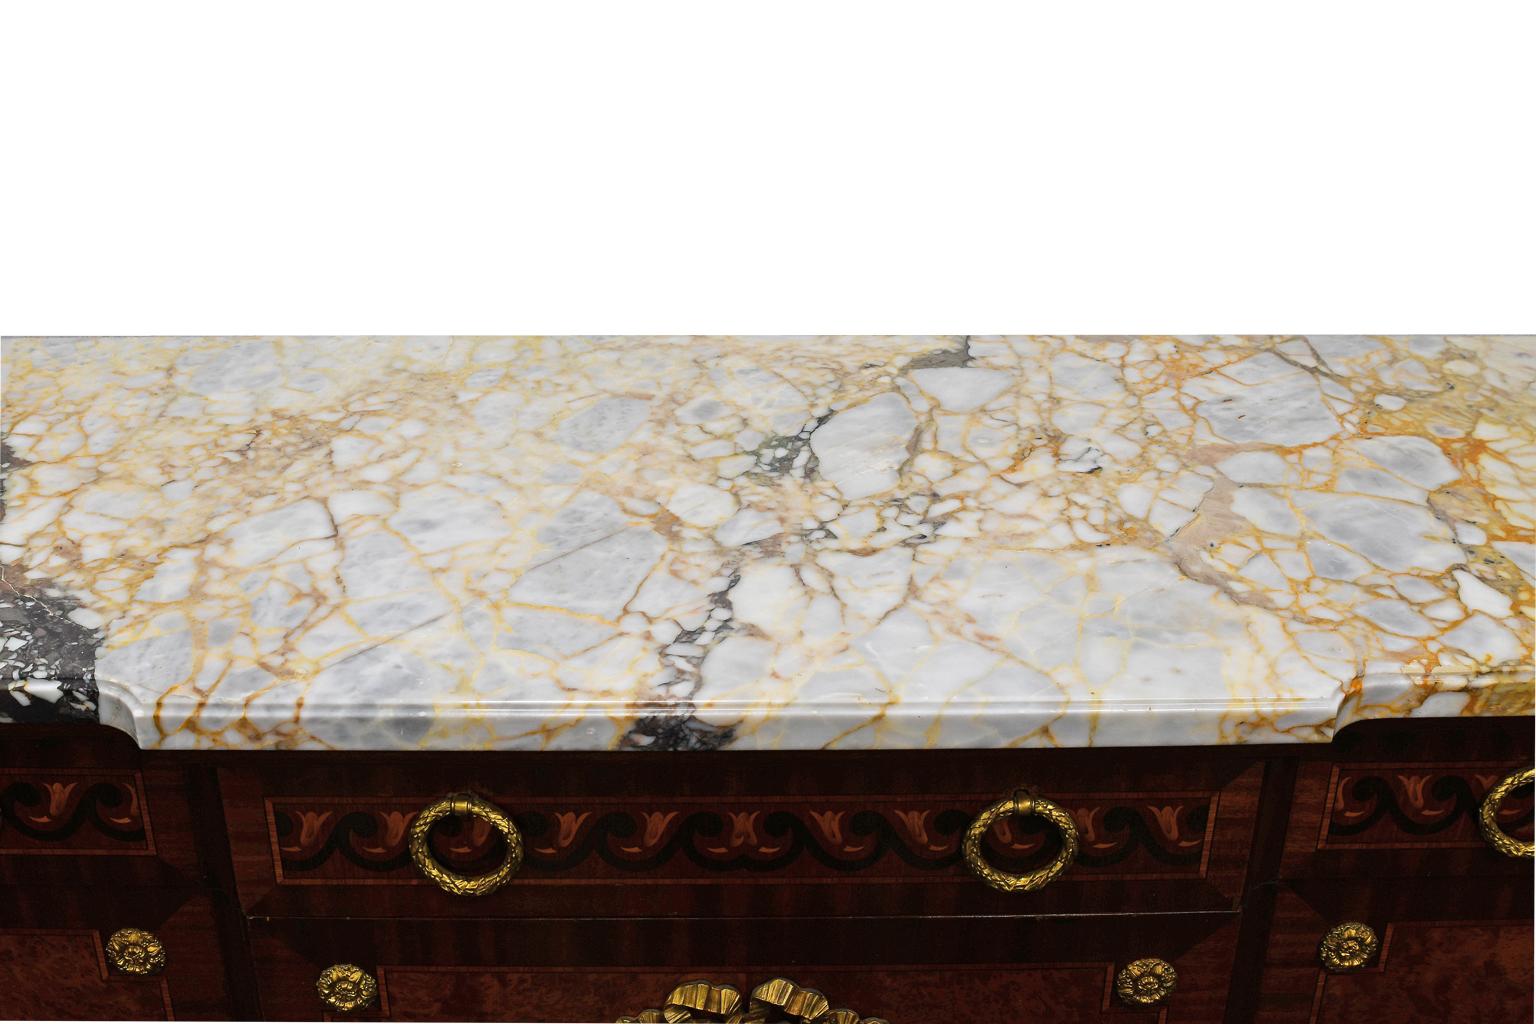 This elegant and well crafted French Belle Époque Louis XV style credenza, with marble top dates from 1880. The quality of the early 19th century furniture produced in the Belle Époque ateliers was exceptional. This credenza is a perfect example of